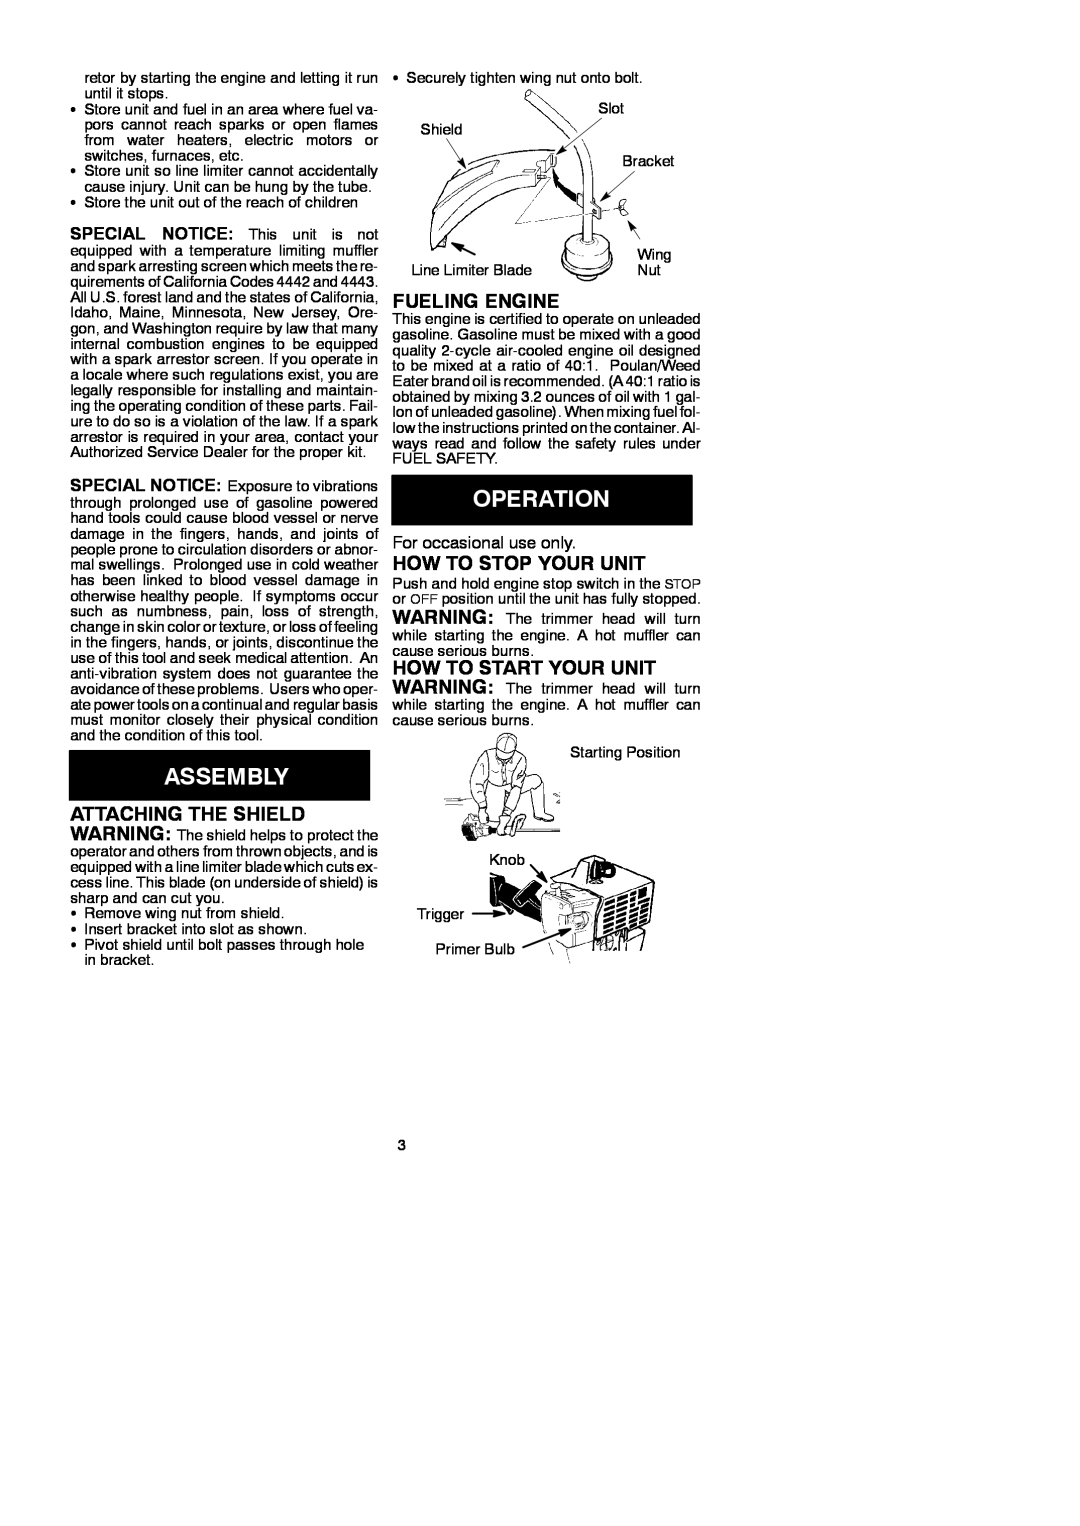 Weed Eater 530083927, XT 35 manual Assembly, Operation, Attaching The Shield, Fueling Engine, How To Stop Your Unit 